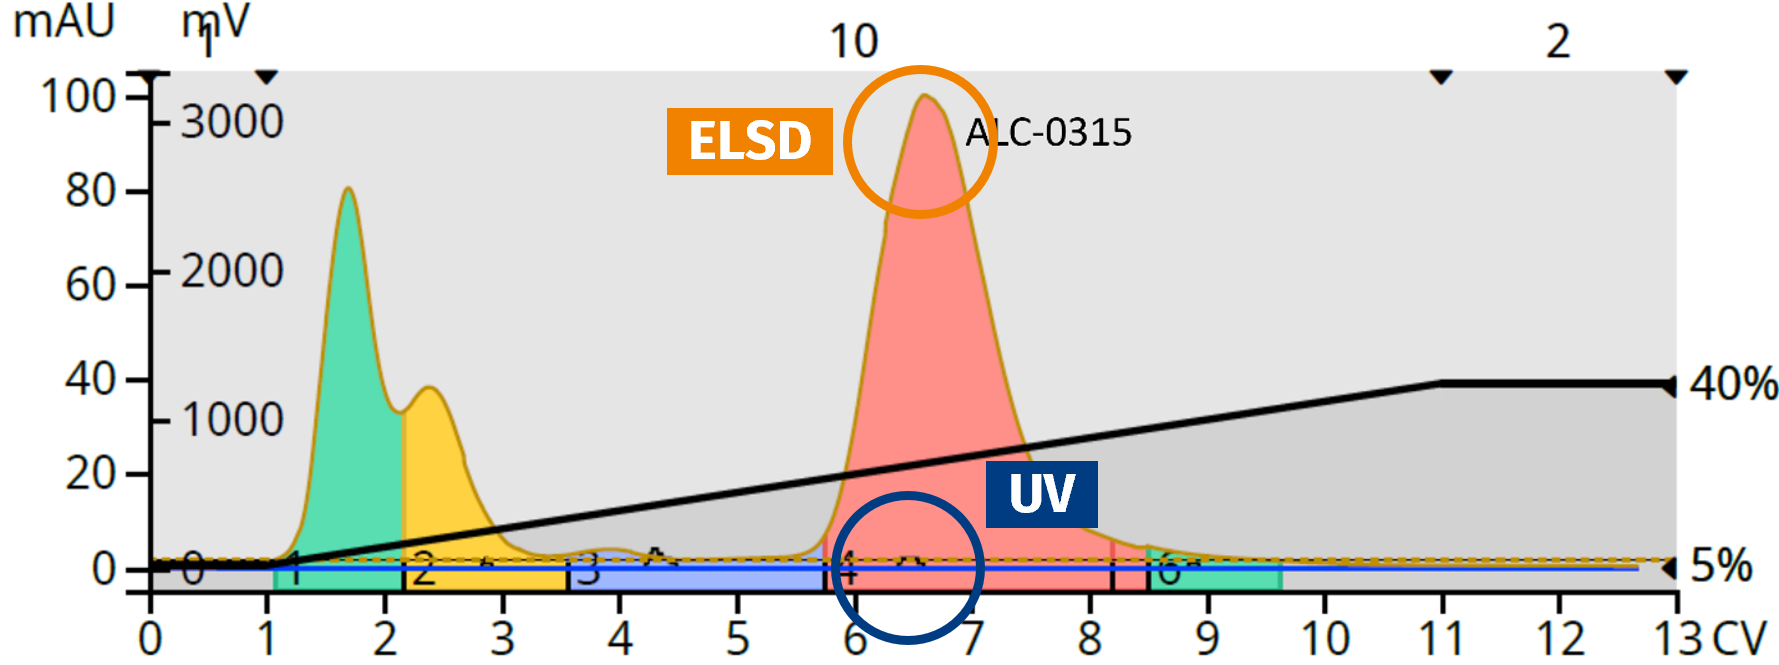 ELSD easily detected the separated lipids from a crude reaction mixture, while UV provided no value.